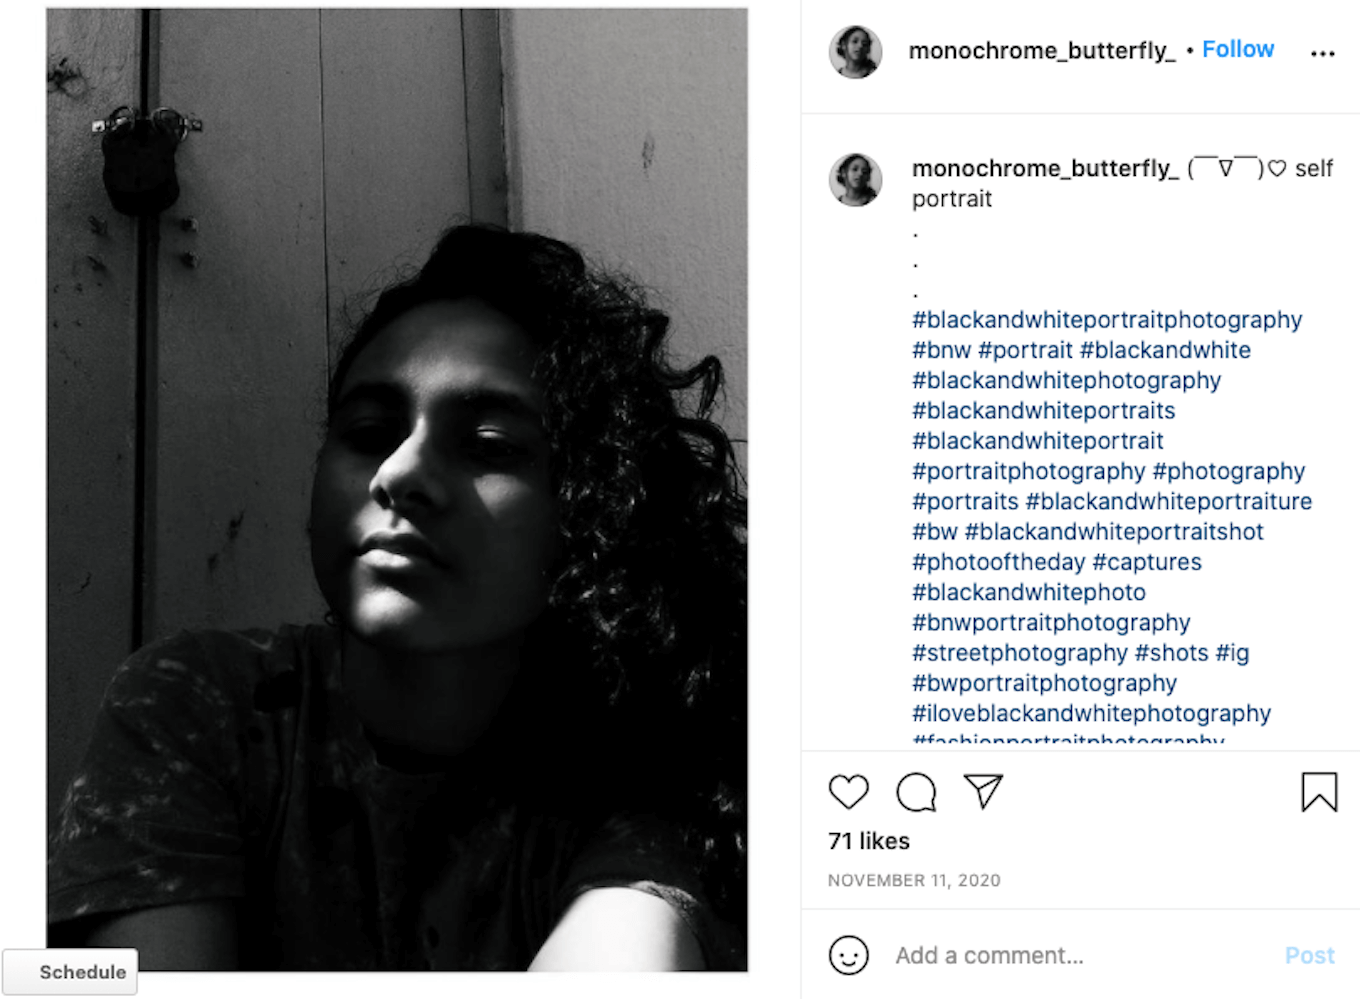 A black-and-white portrait from Instagram featuring a woman looking at the camera in deep shadows.